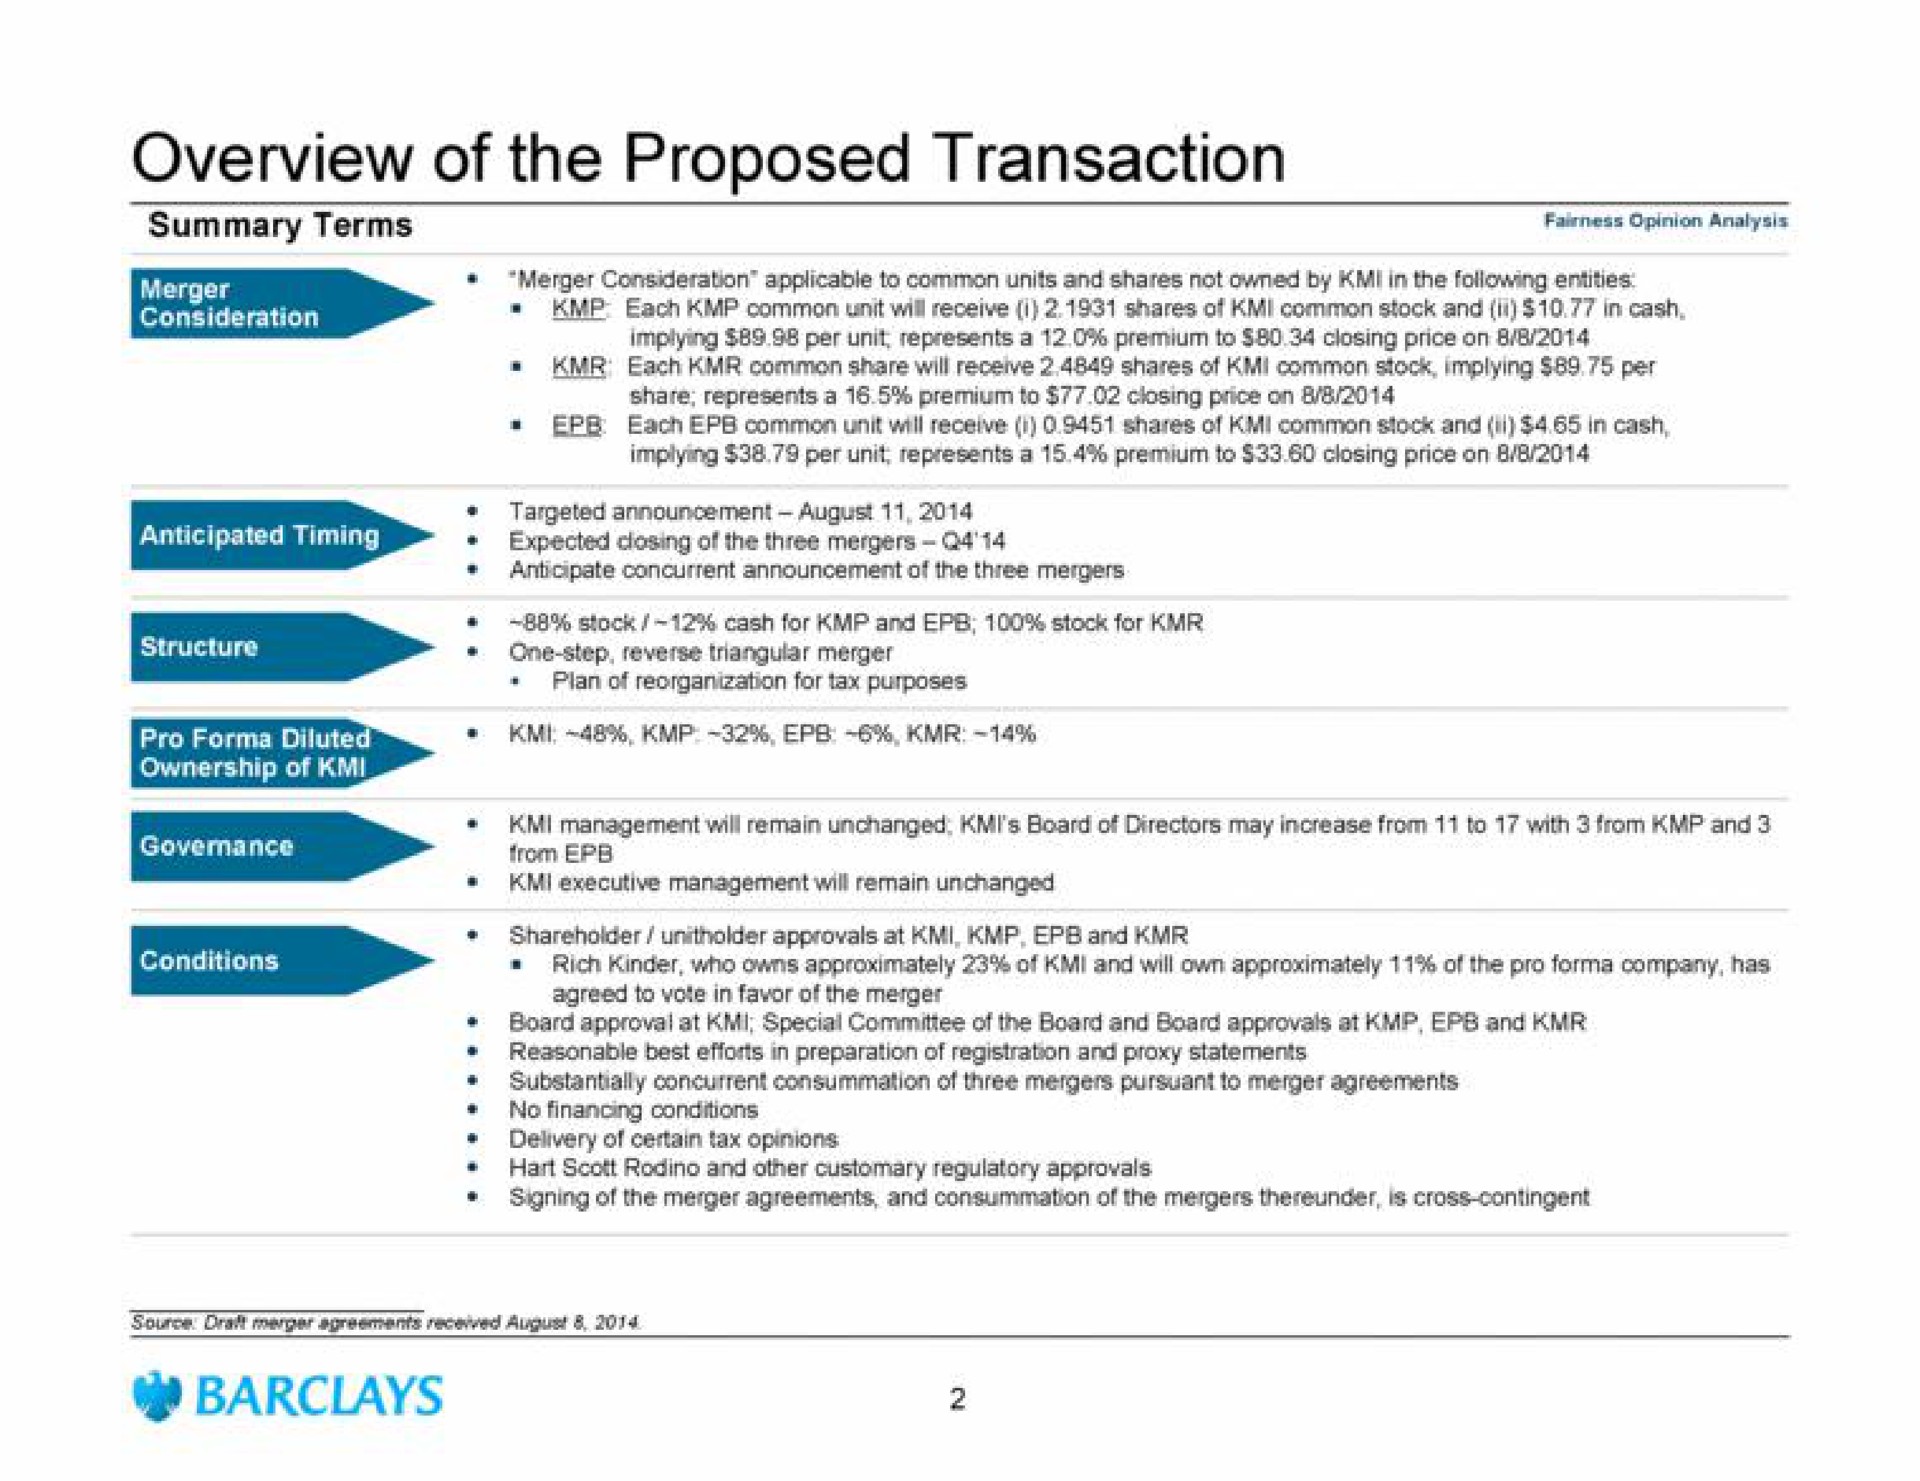 overview of the proposed transaction als pinion | Barclays